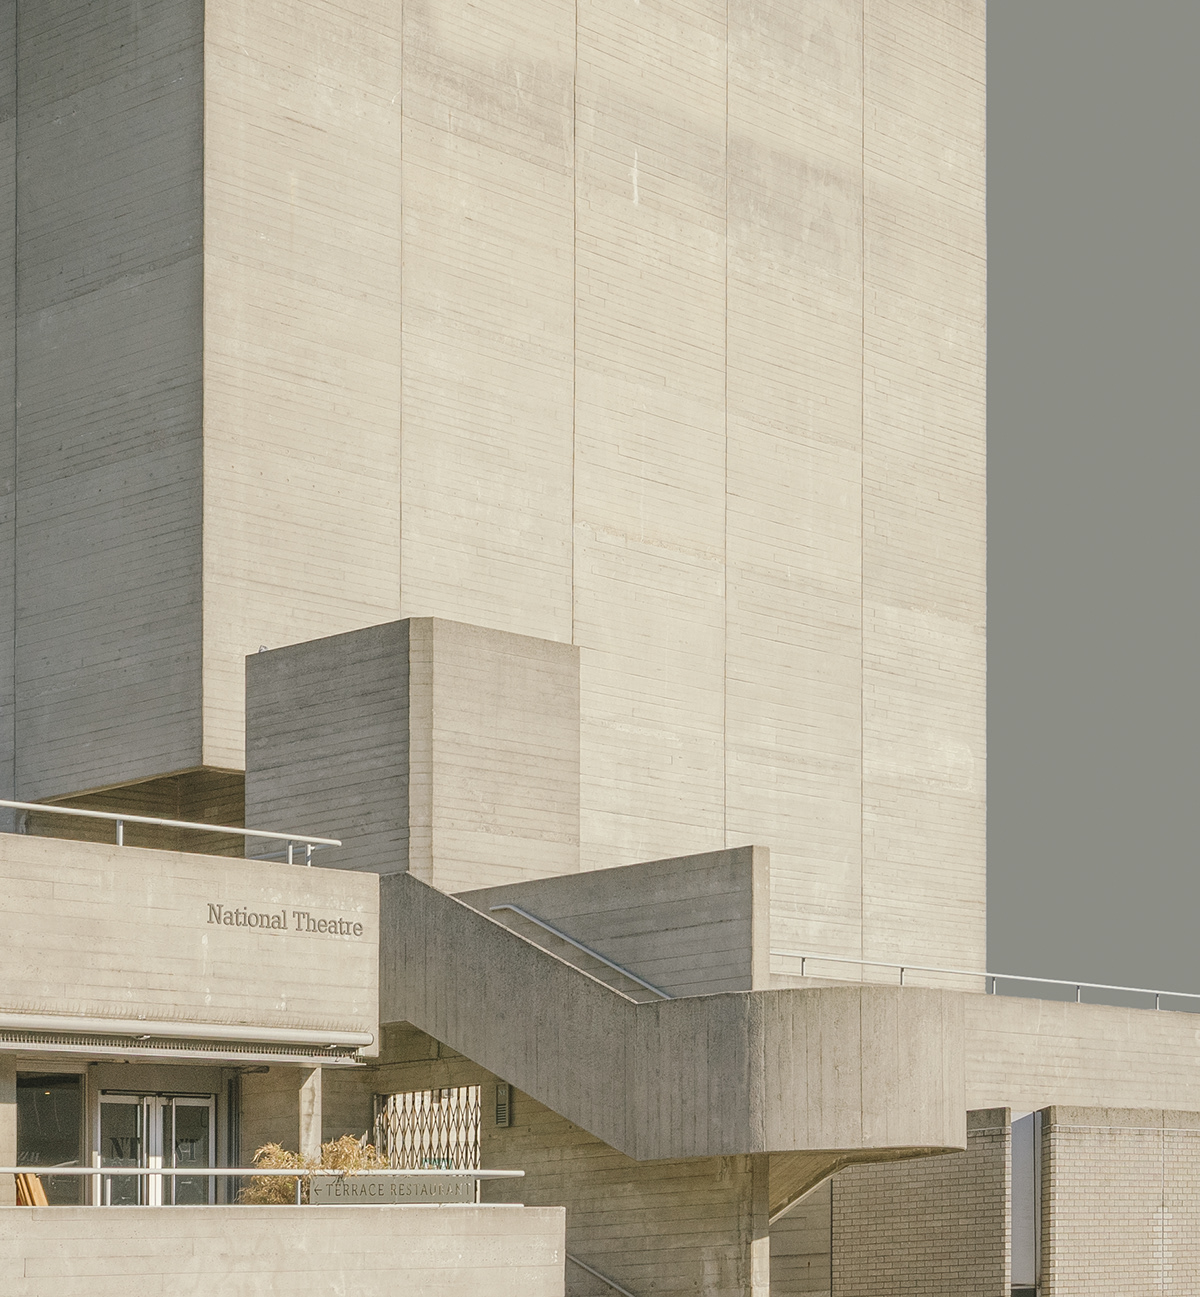 architecture Minimalism London Brutalism minimal Photography  architectural national theatre color Zeiss